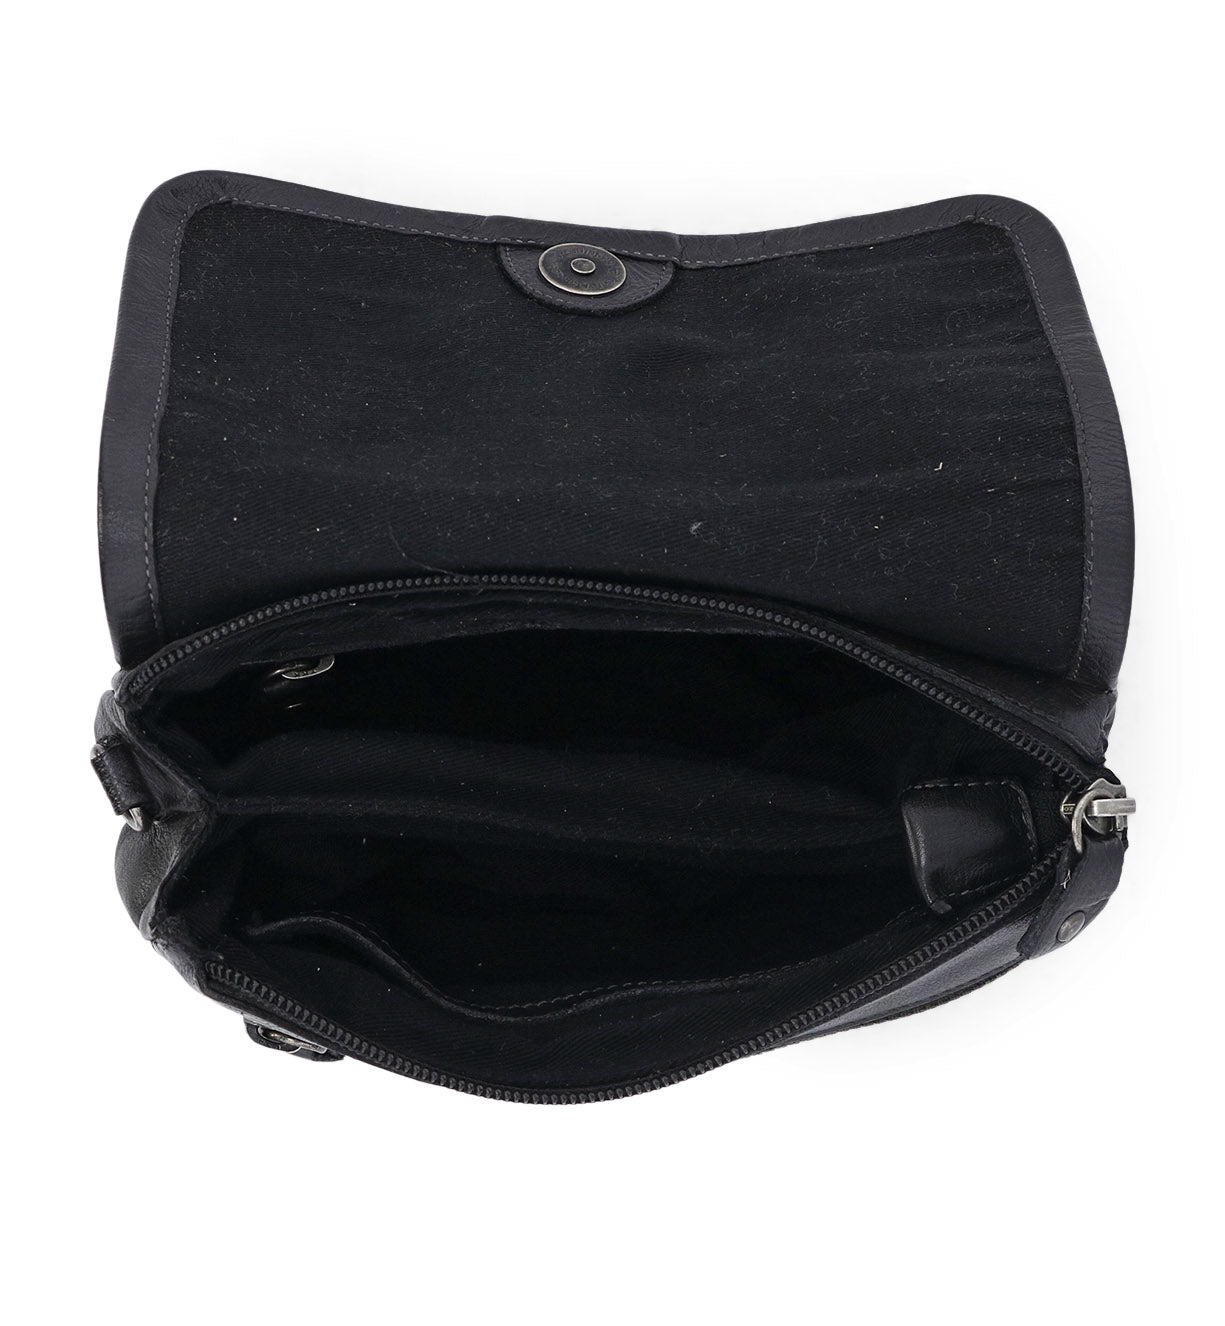 A black Ziggy purse with a zipper on the side made by Bed Stu.